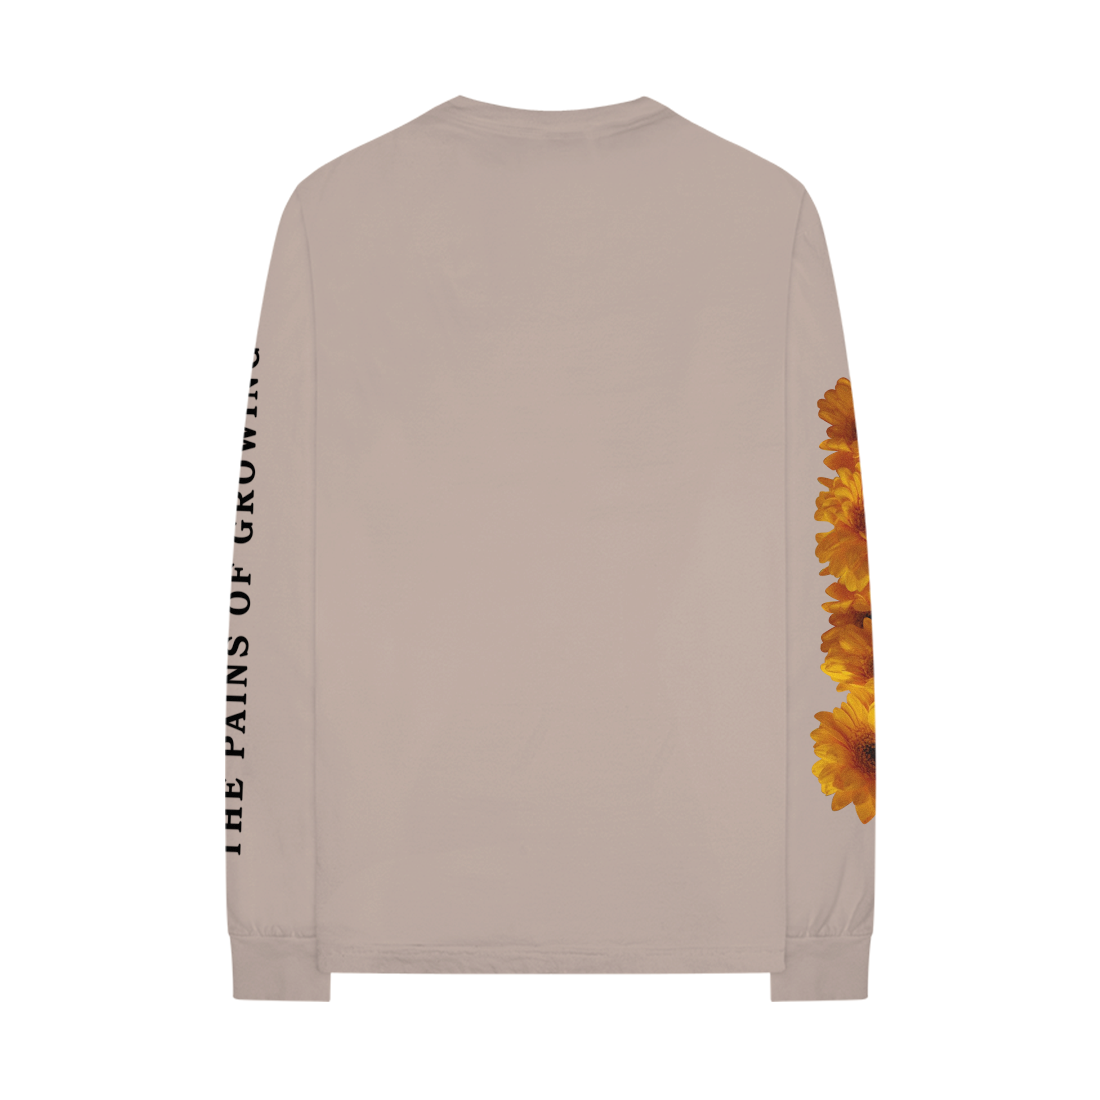 'The Pains Of Growing' L/S